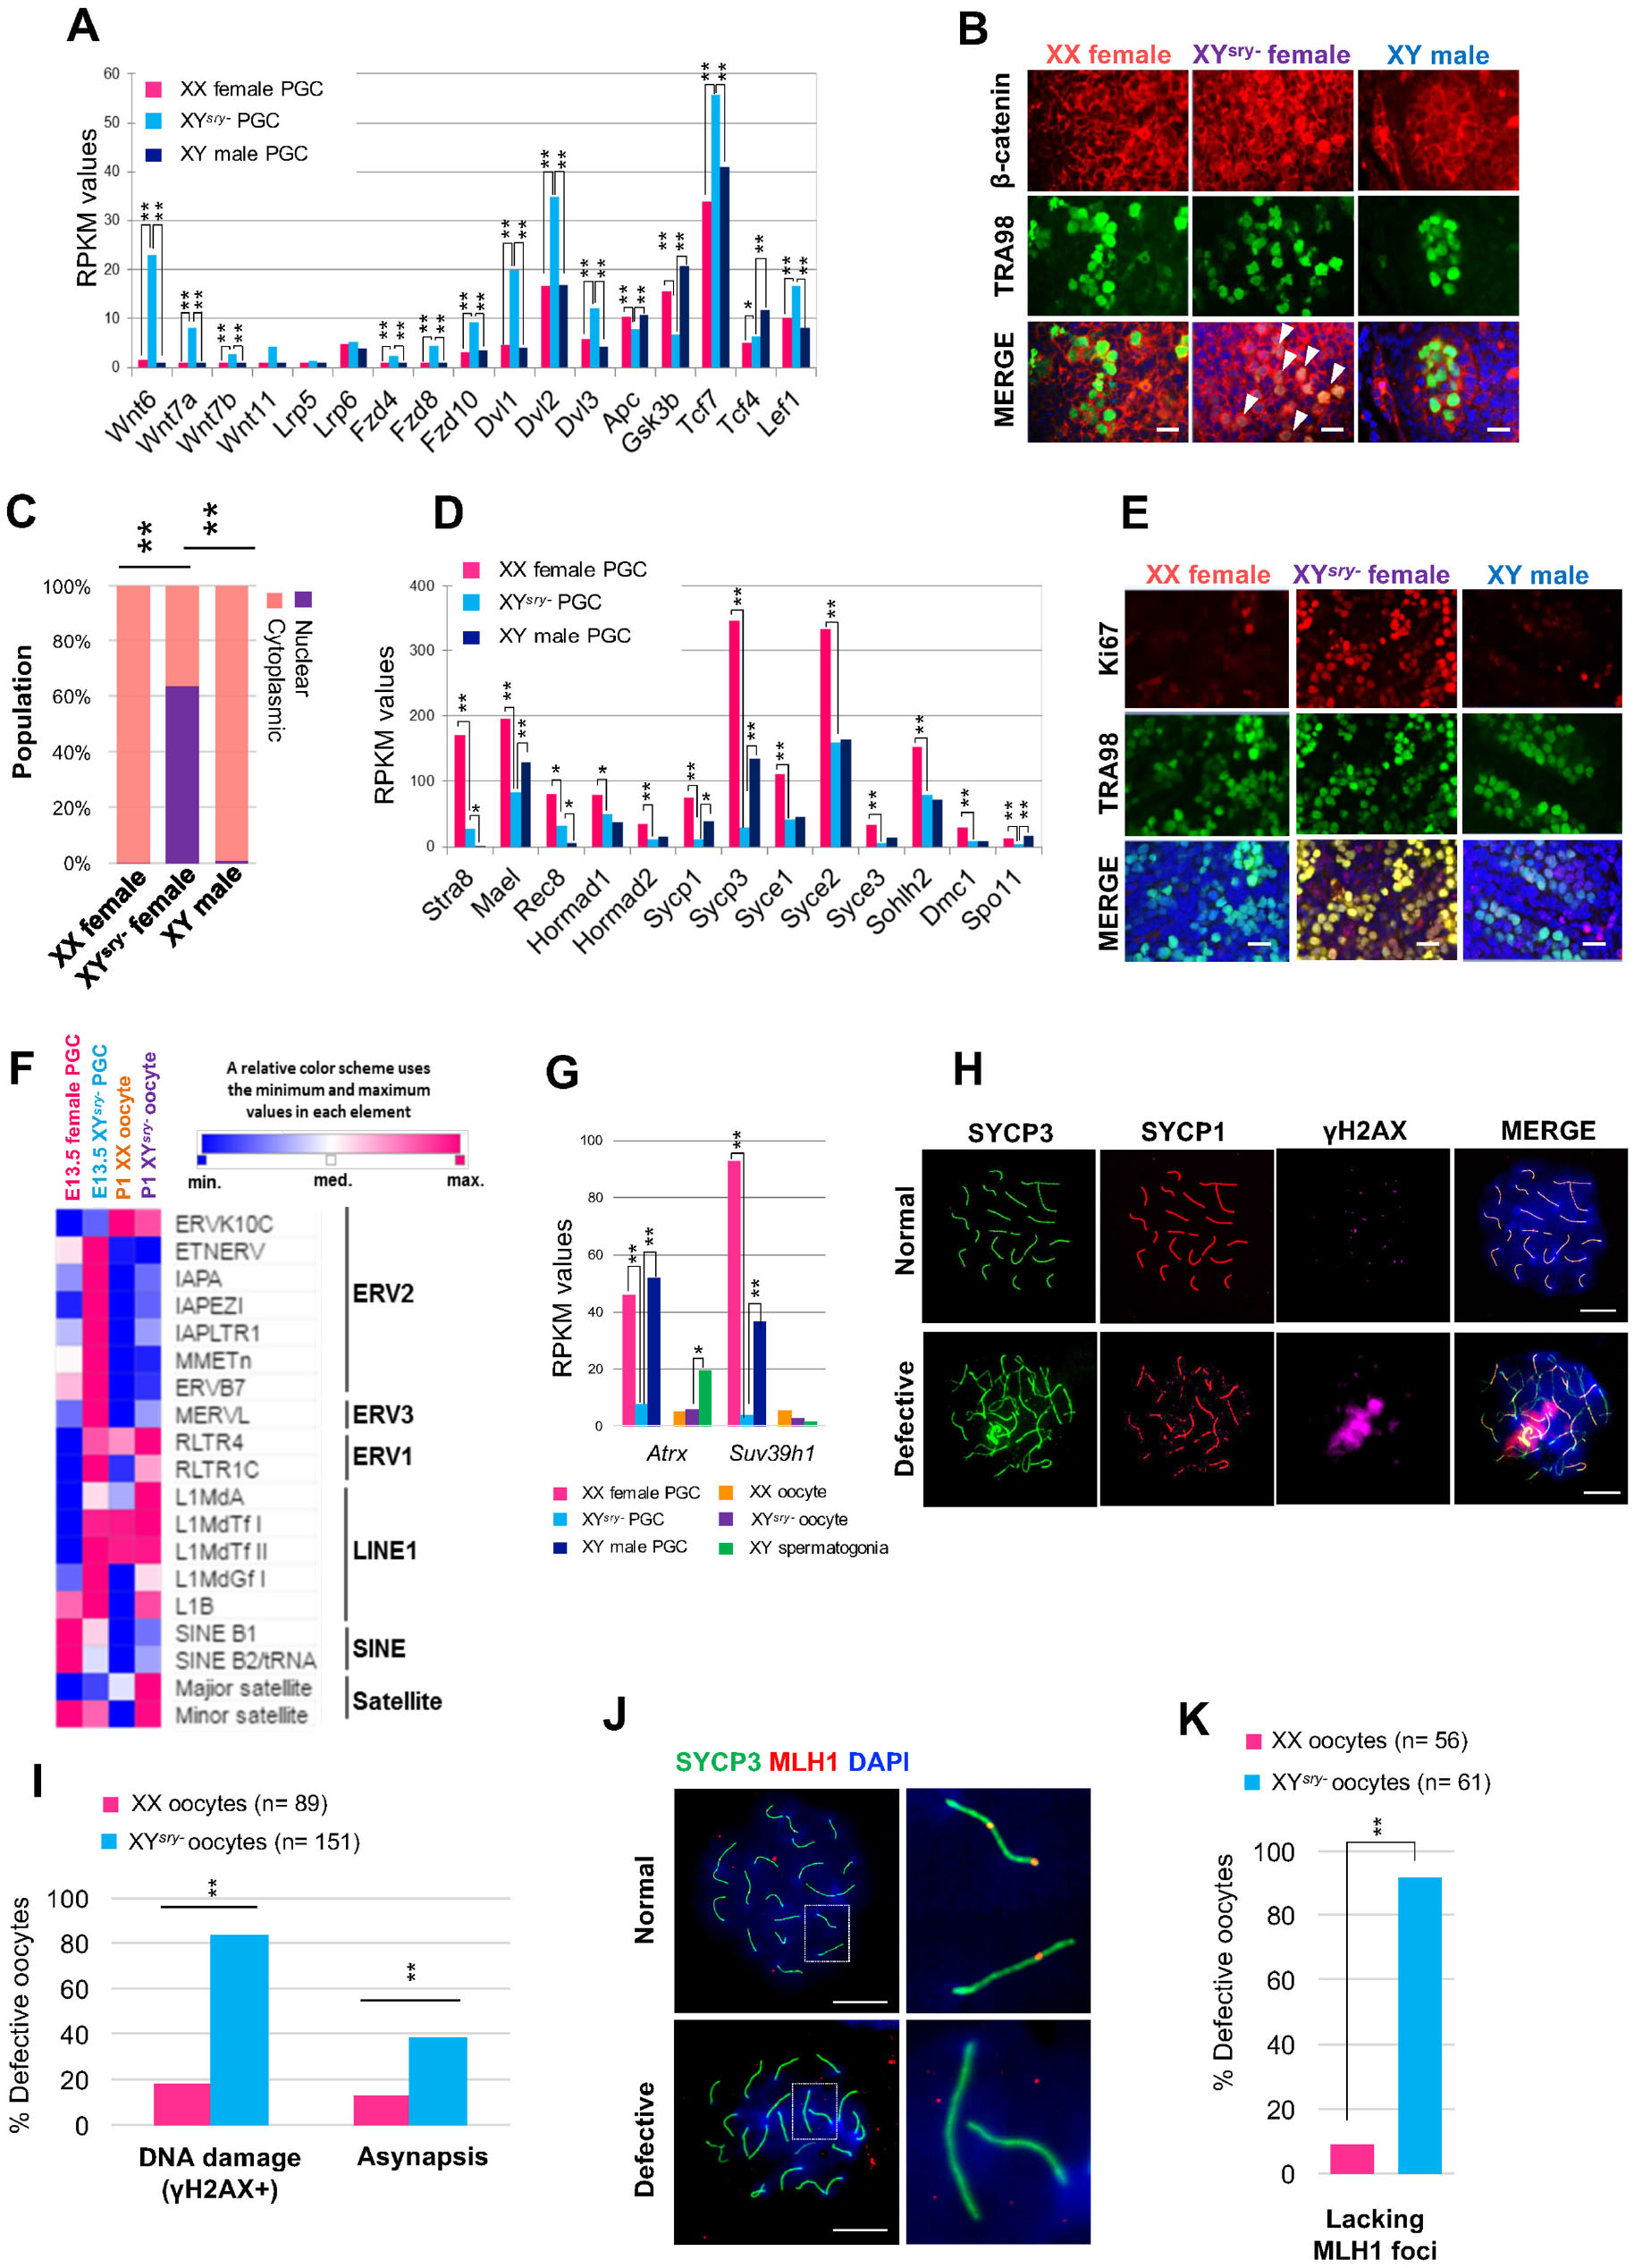 Xy Oocytes Of Sex Reversed Females With A Sry Mutation Deviate From The Normal Developmental Process Beyond The Mitotic Stage